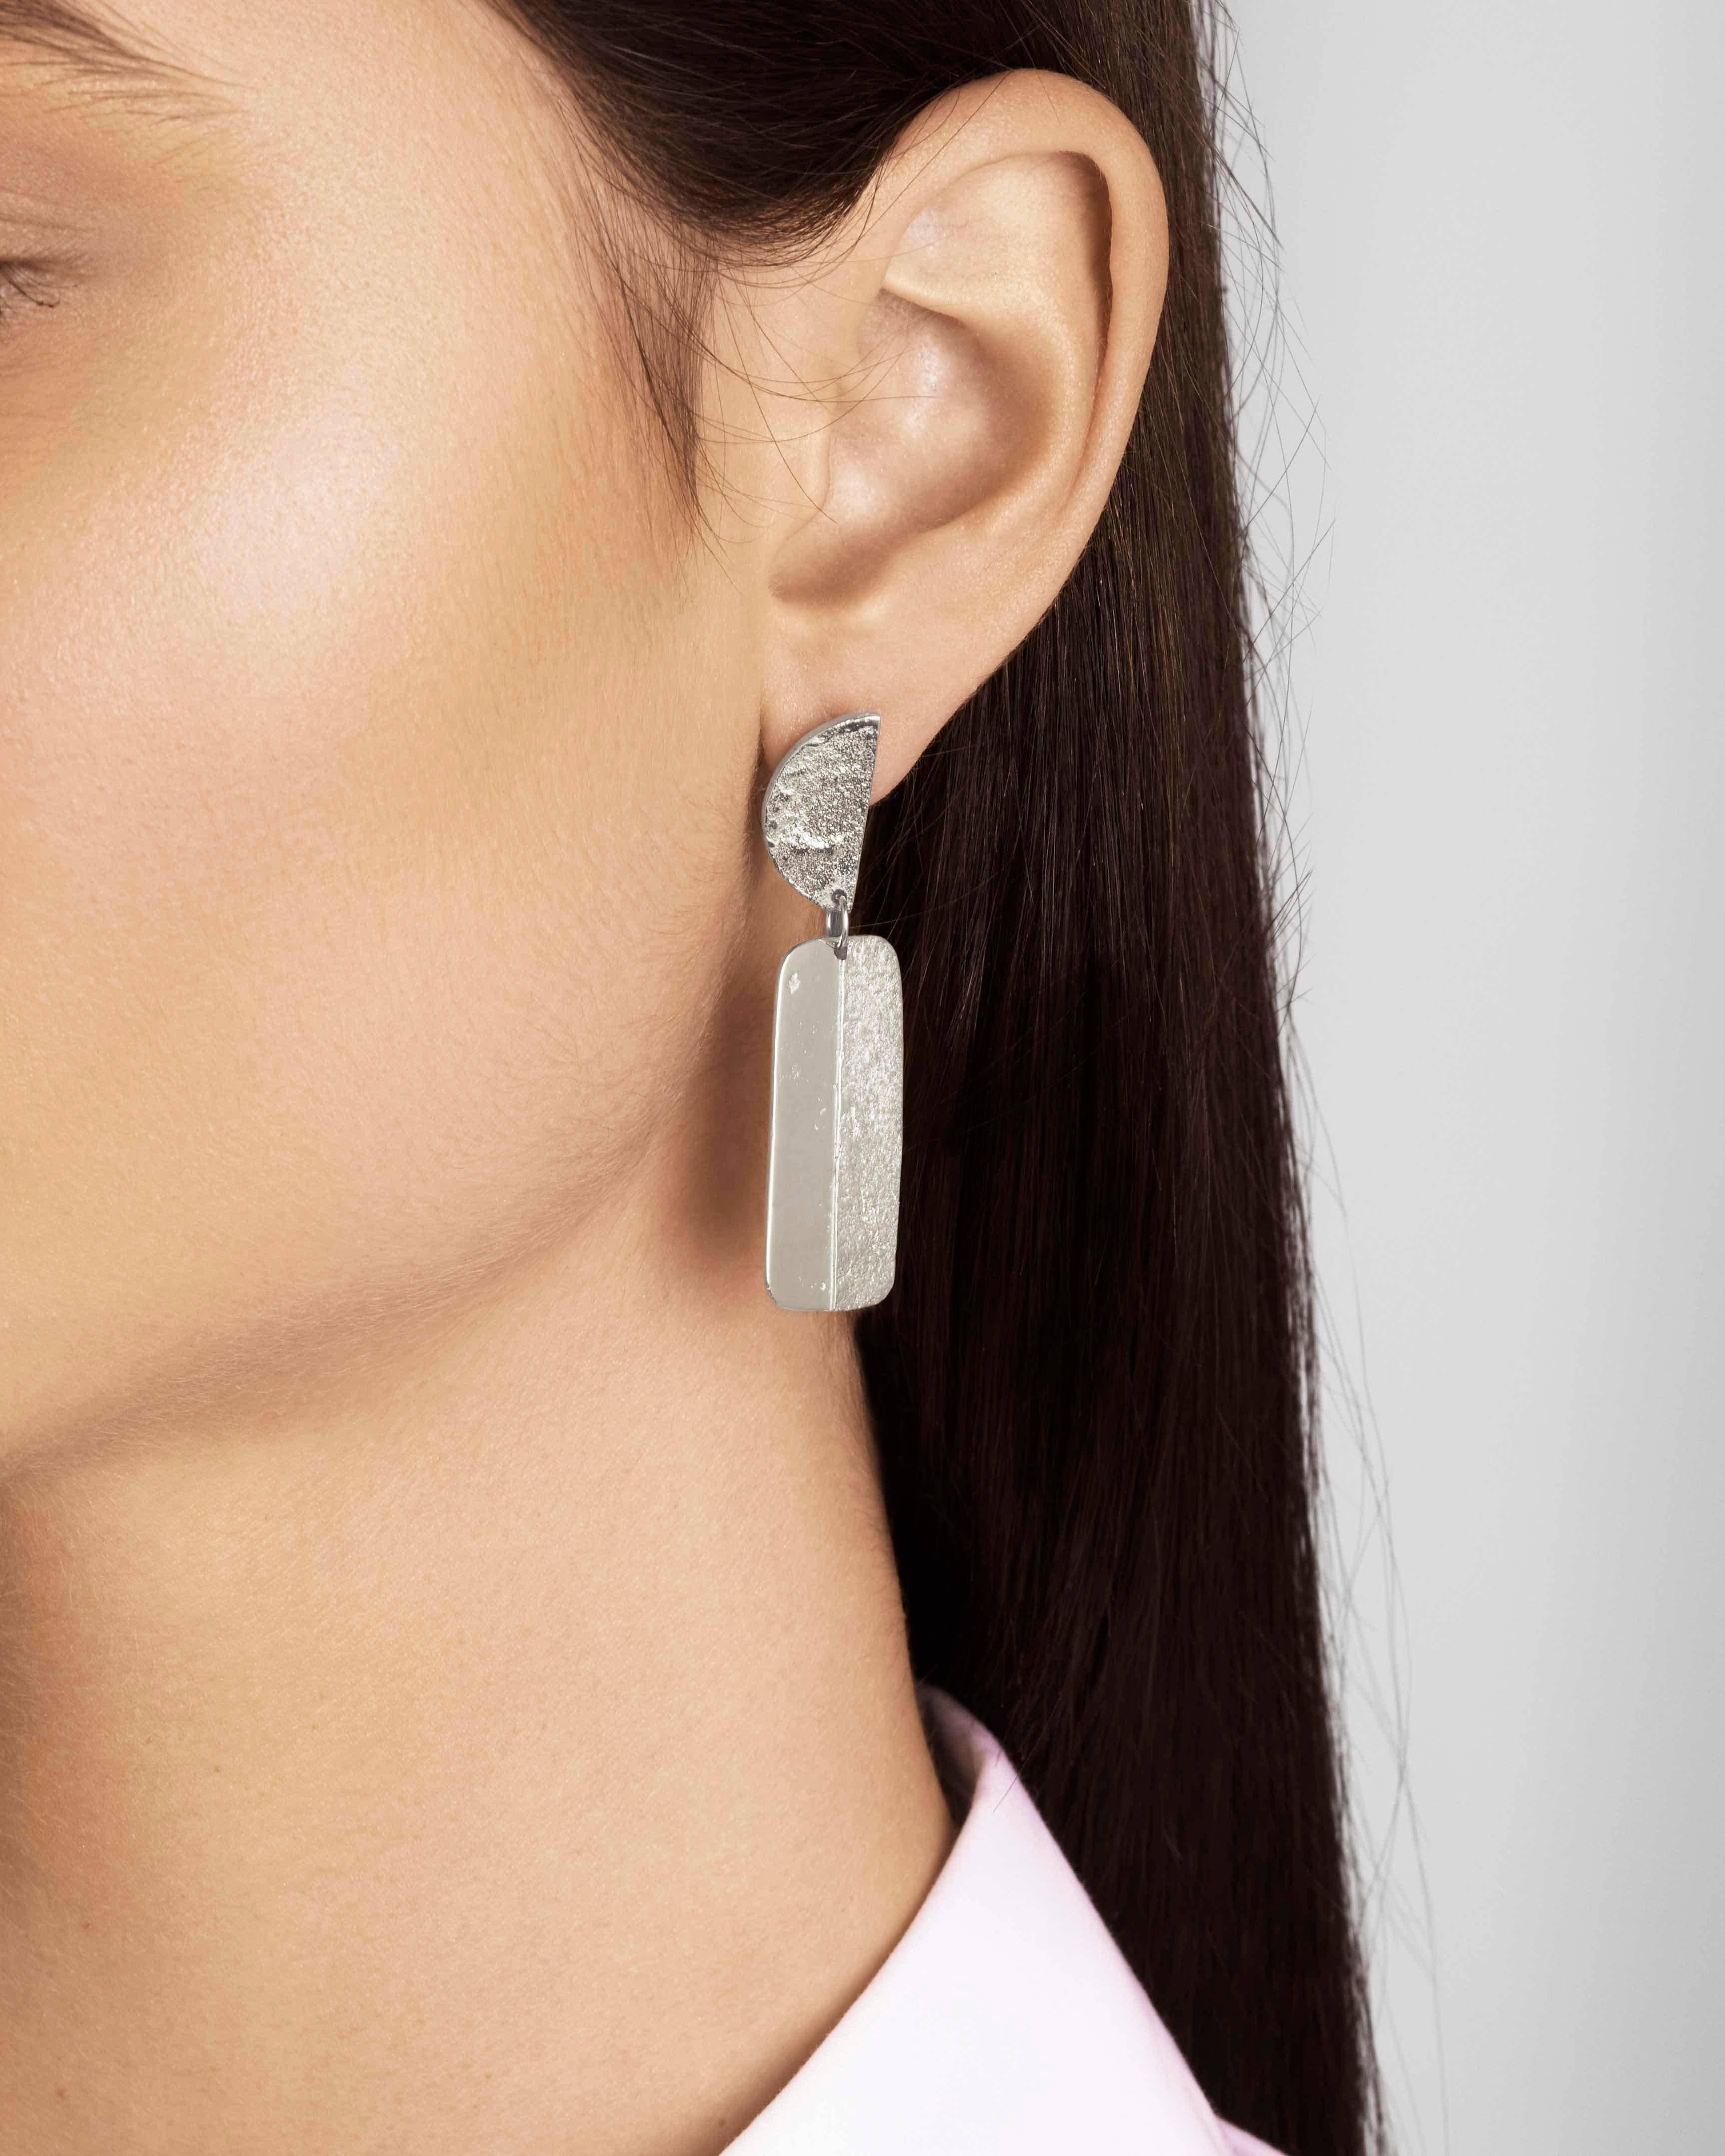 Articulated statement earrings with a combination of shimmering texture and a rustic high-polish finish. In sterling silver with a post and butterfly closure.  Earrings measure approximately 1.4 cm wide by 5 cm long. 

Handmade in London. 